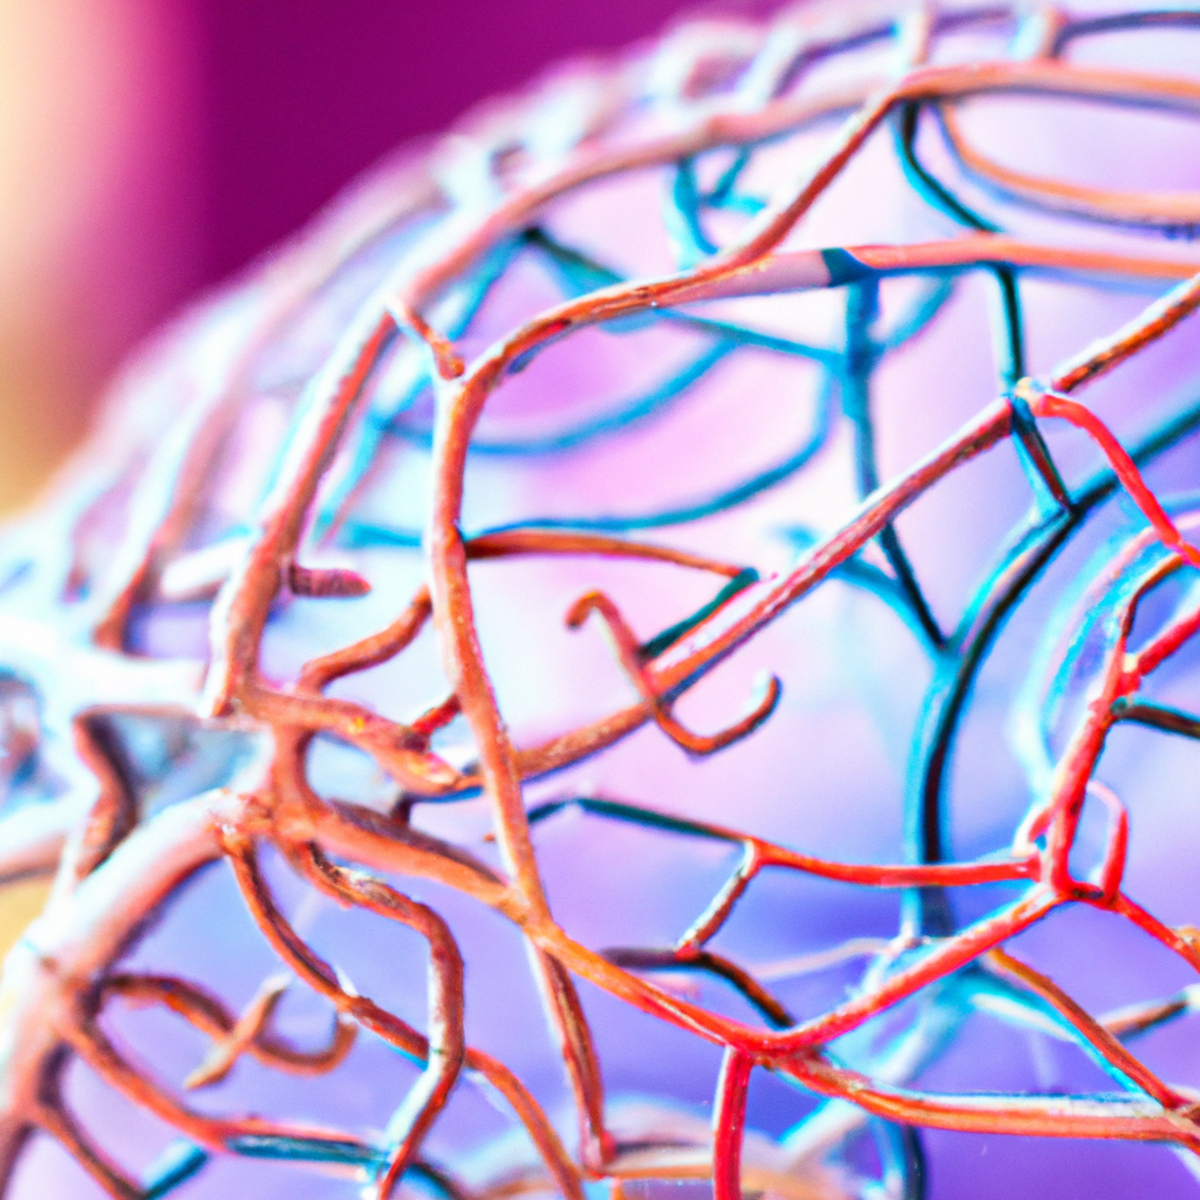 Close-up of transparent brain model showcasing neural pathways, vibrant colors representing affected areas in Huntington's Disease.